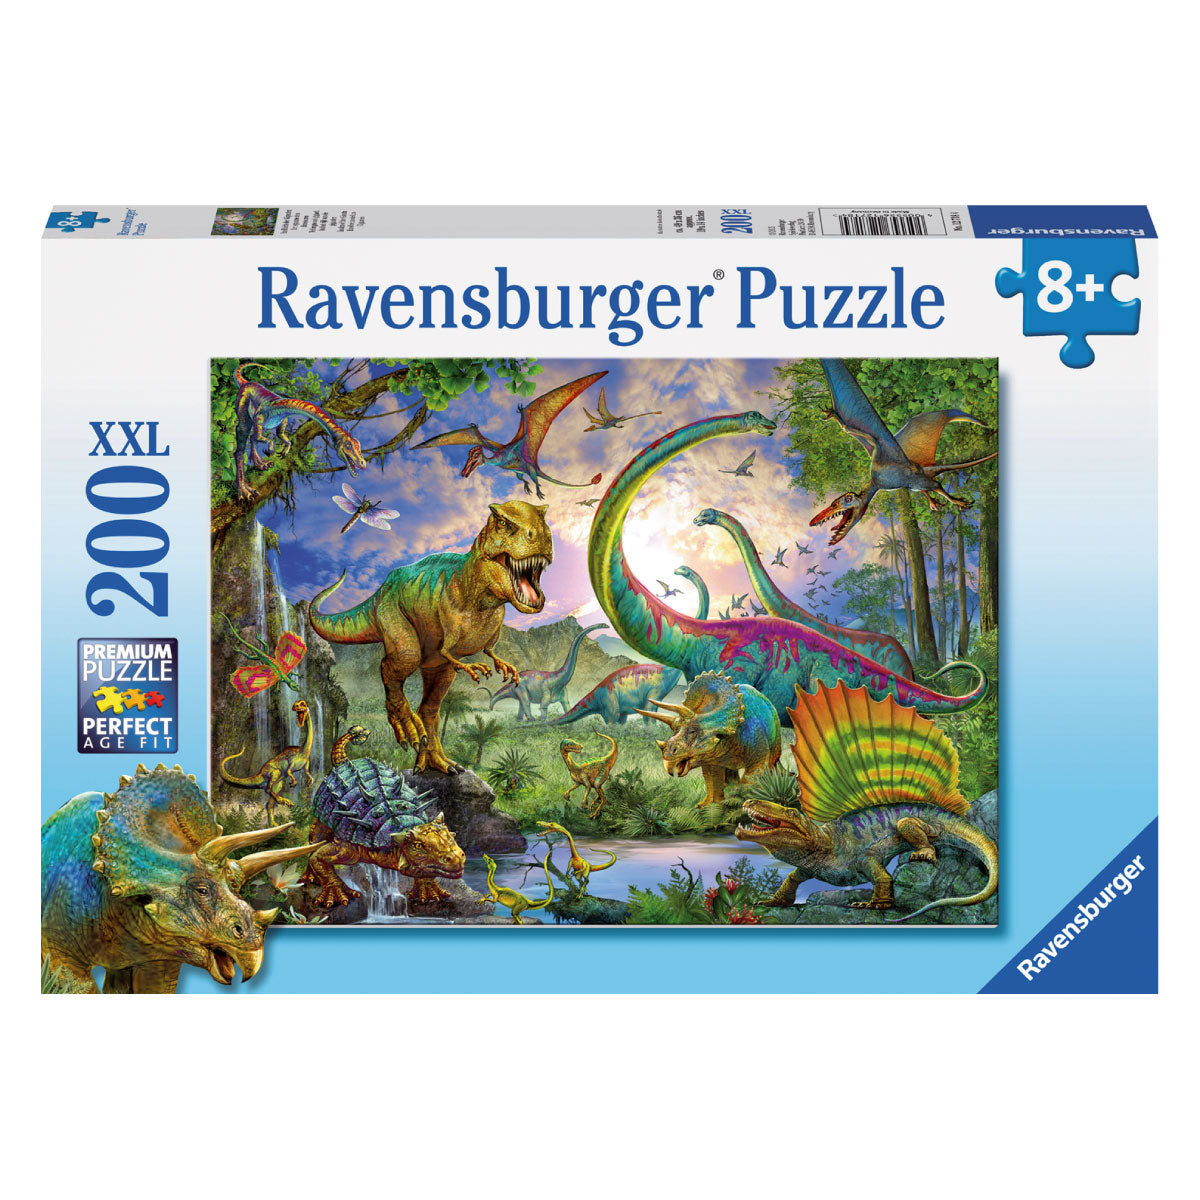 Realm of the Giants 200 pc XXL Jigsaw Puzzle from Ravensburger